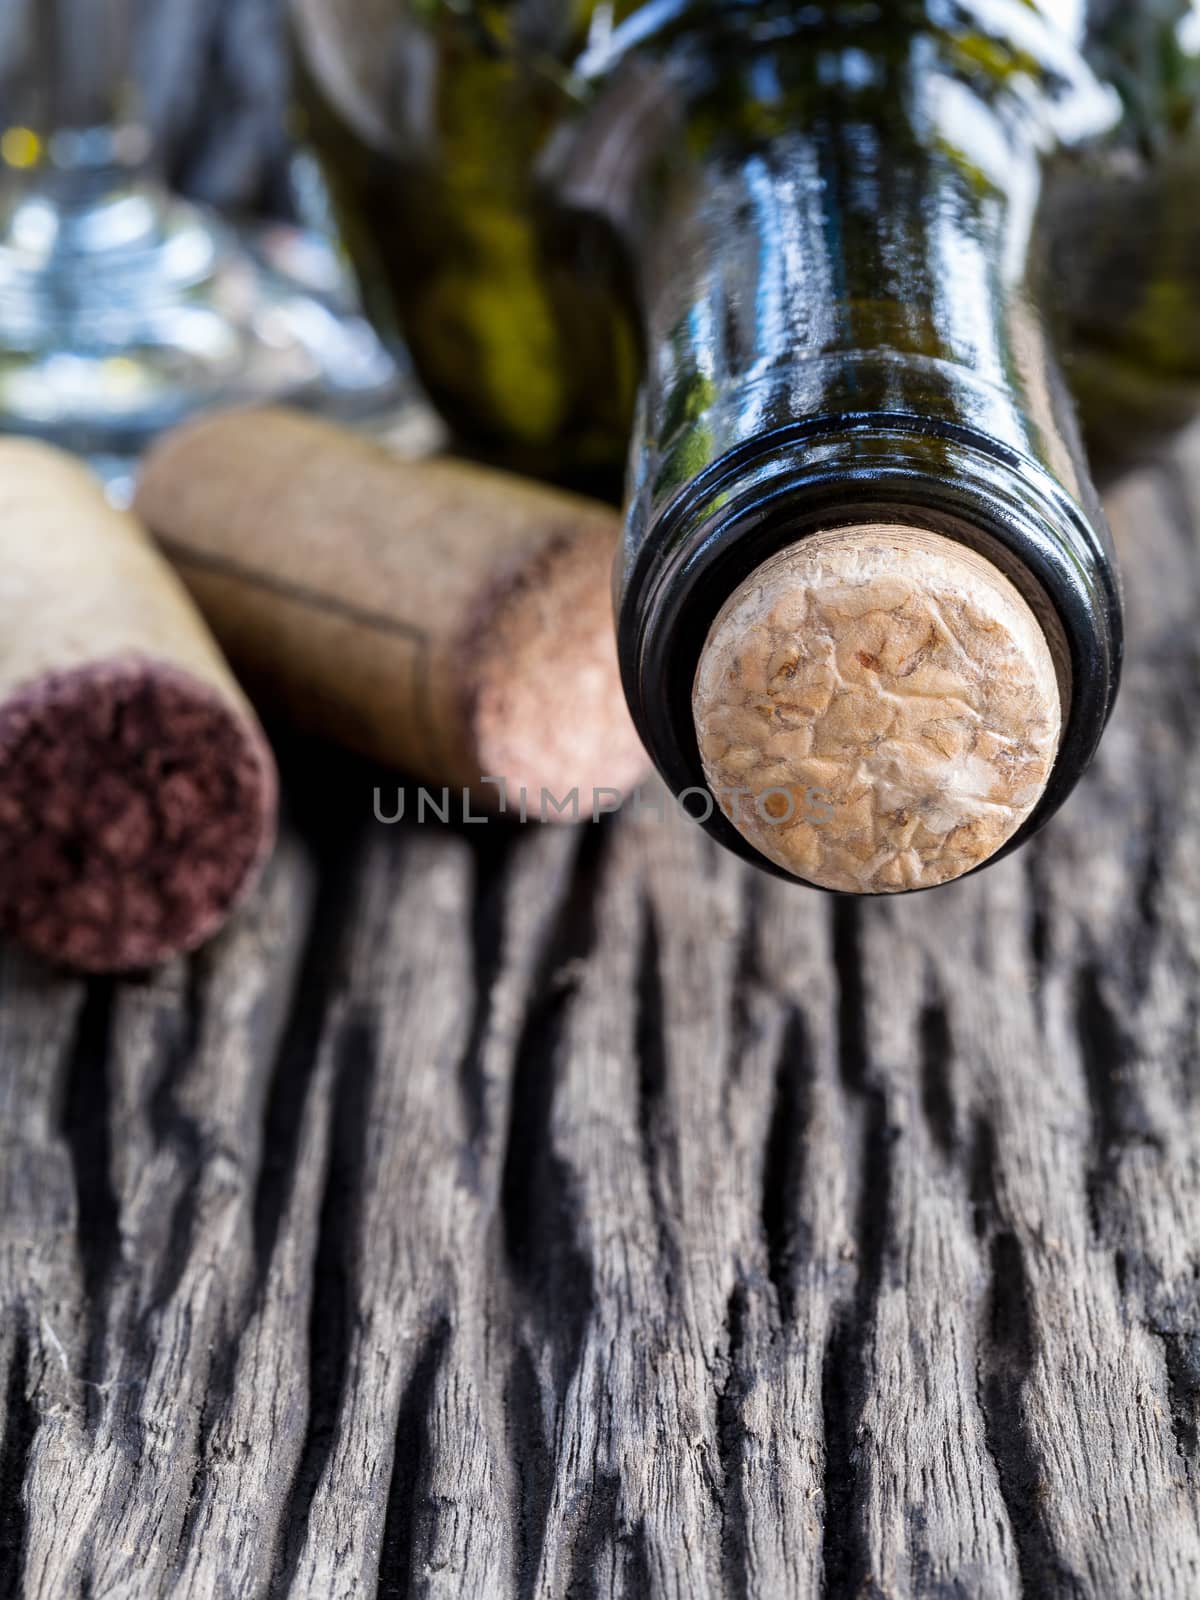 Bottle of wine and corks on wooden table. - Macro shot with sele by kerdkanno